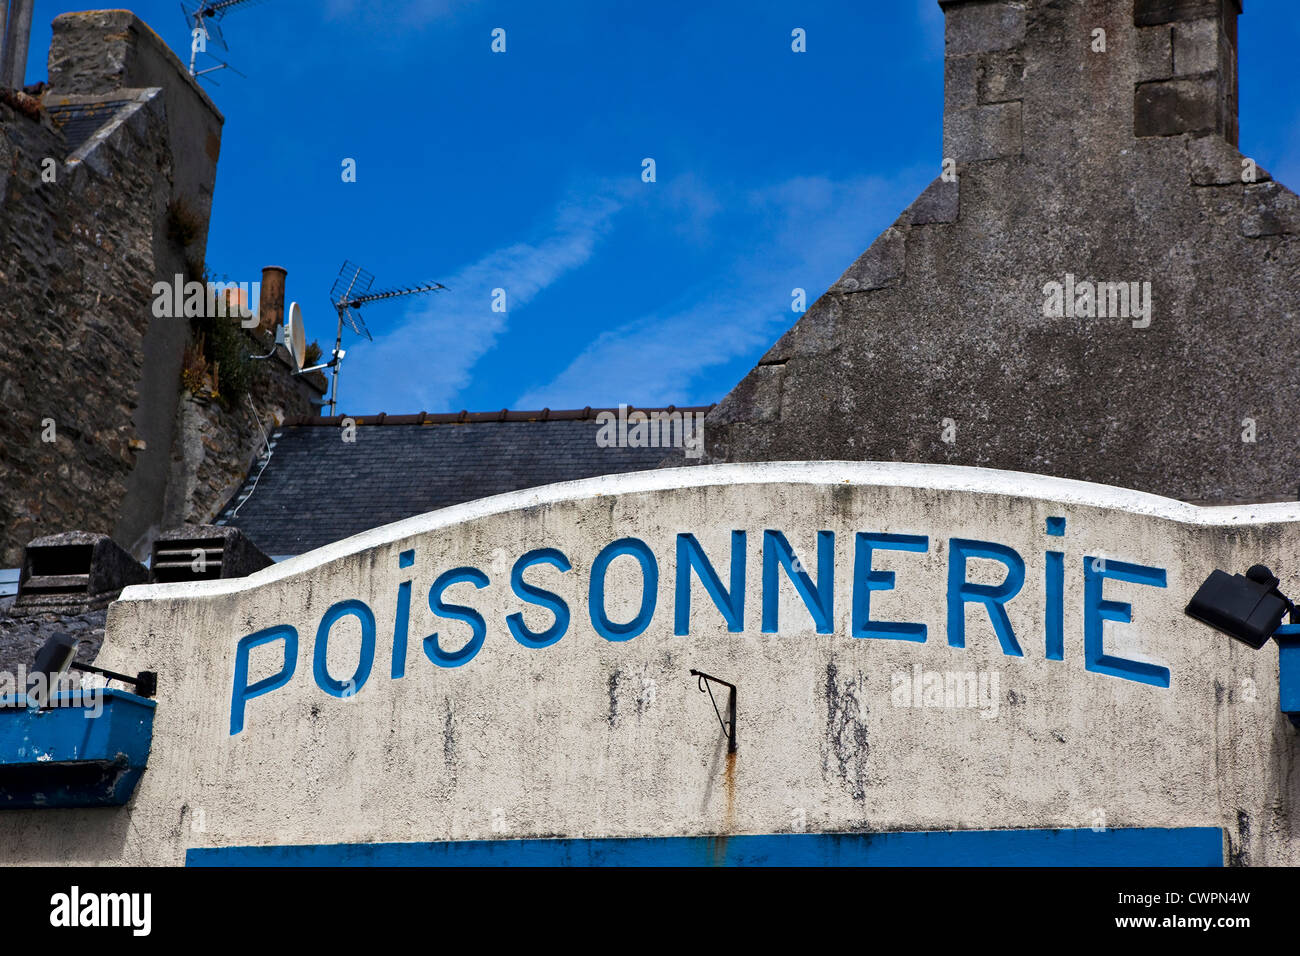 Poissonnerie - a fish ship in the port town of Roscoff, Brittany, France Stock Photo